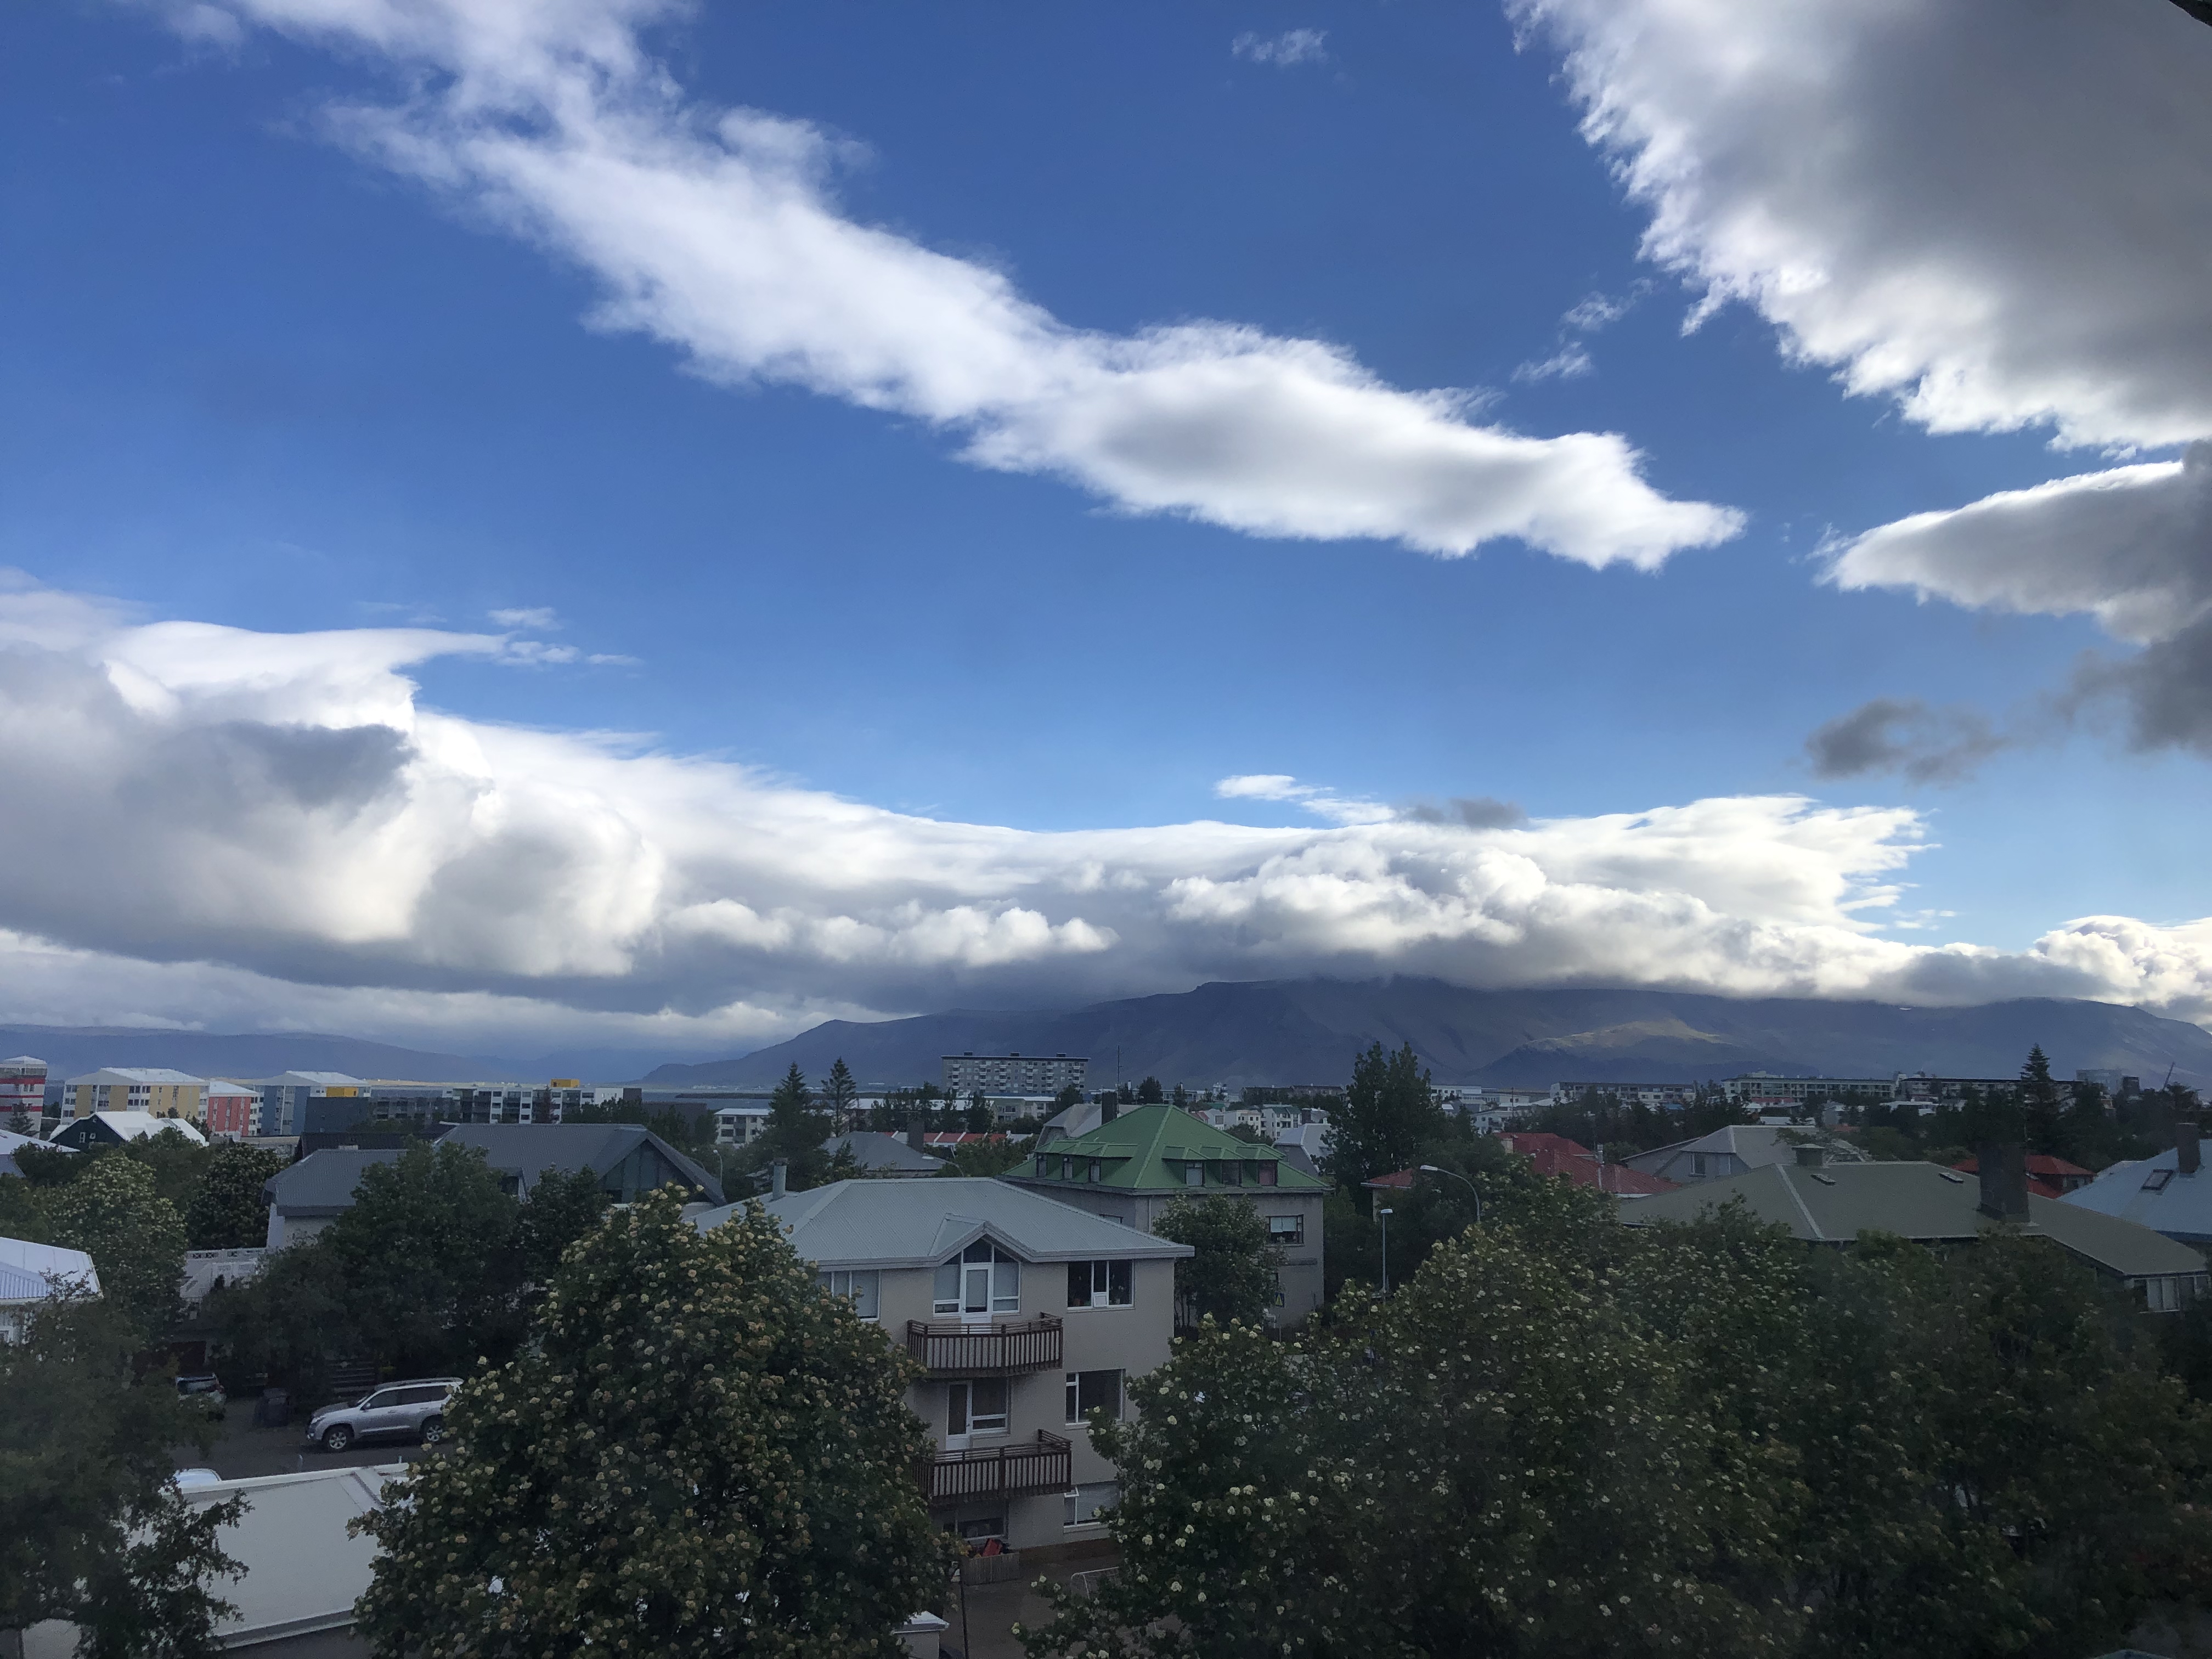 View of Reykjavik with blue skies, big clouds, houses and trees.